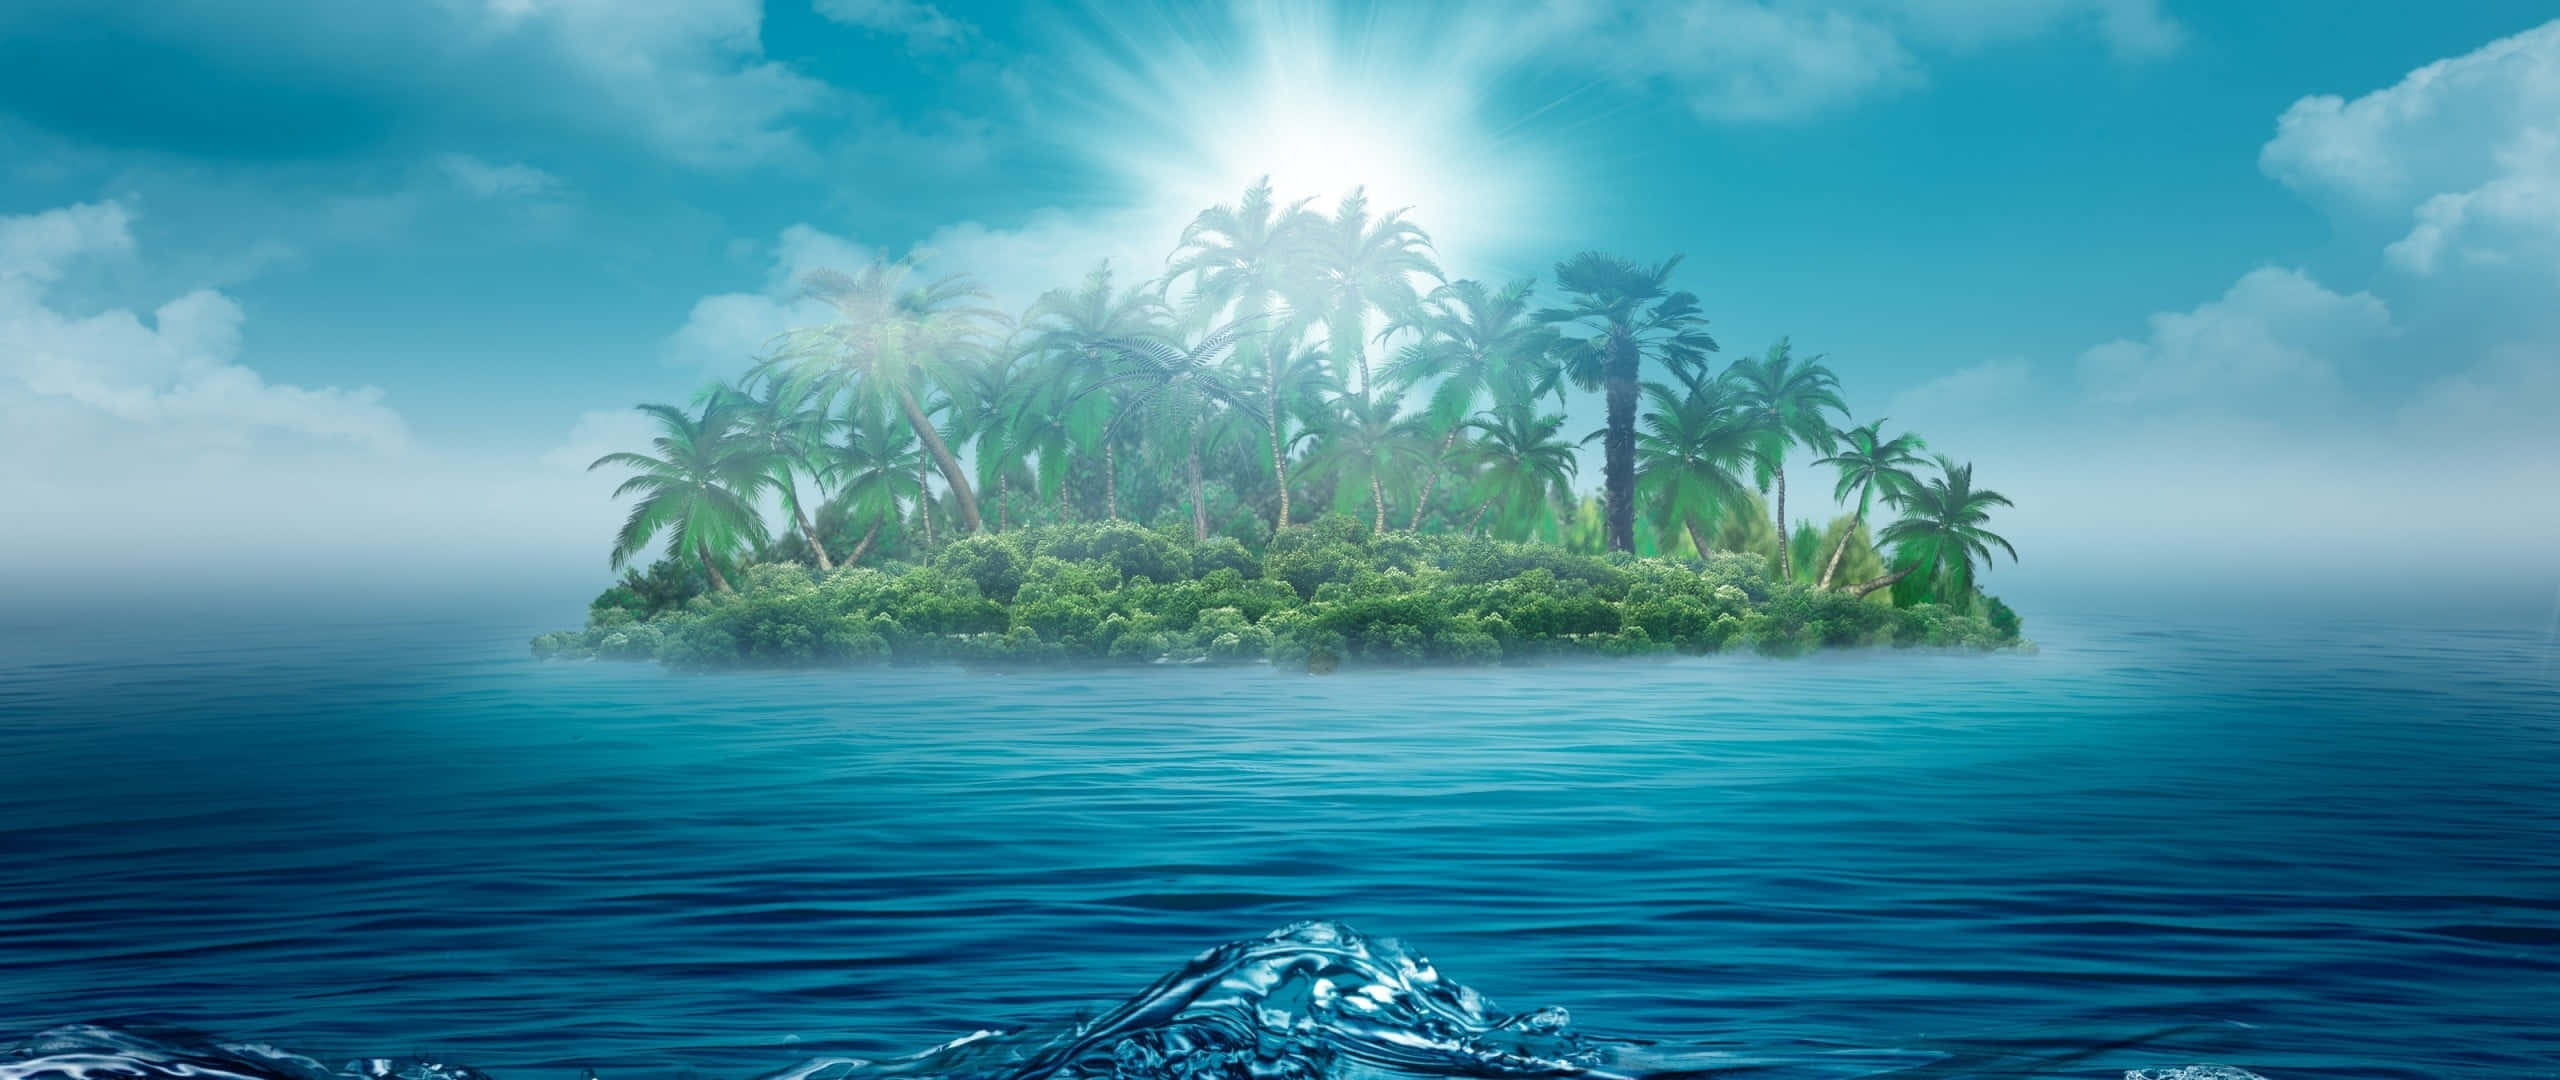 An Island With Palm Trees In The Water